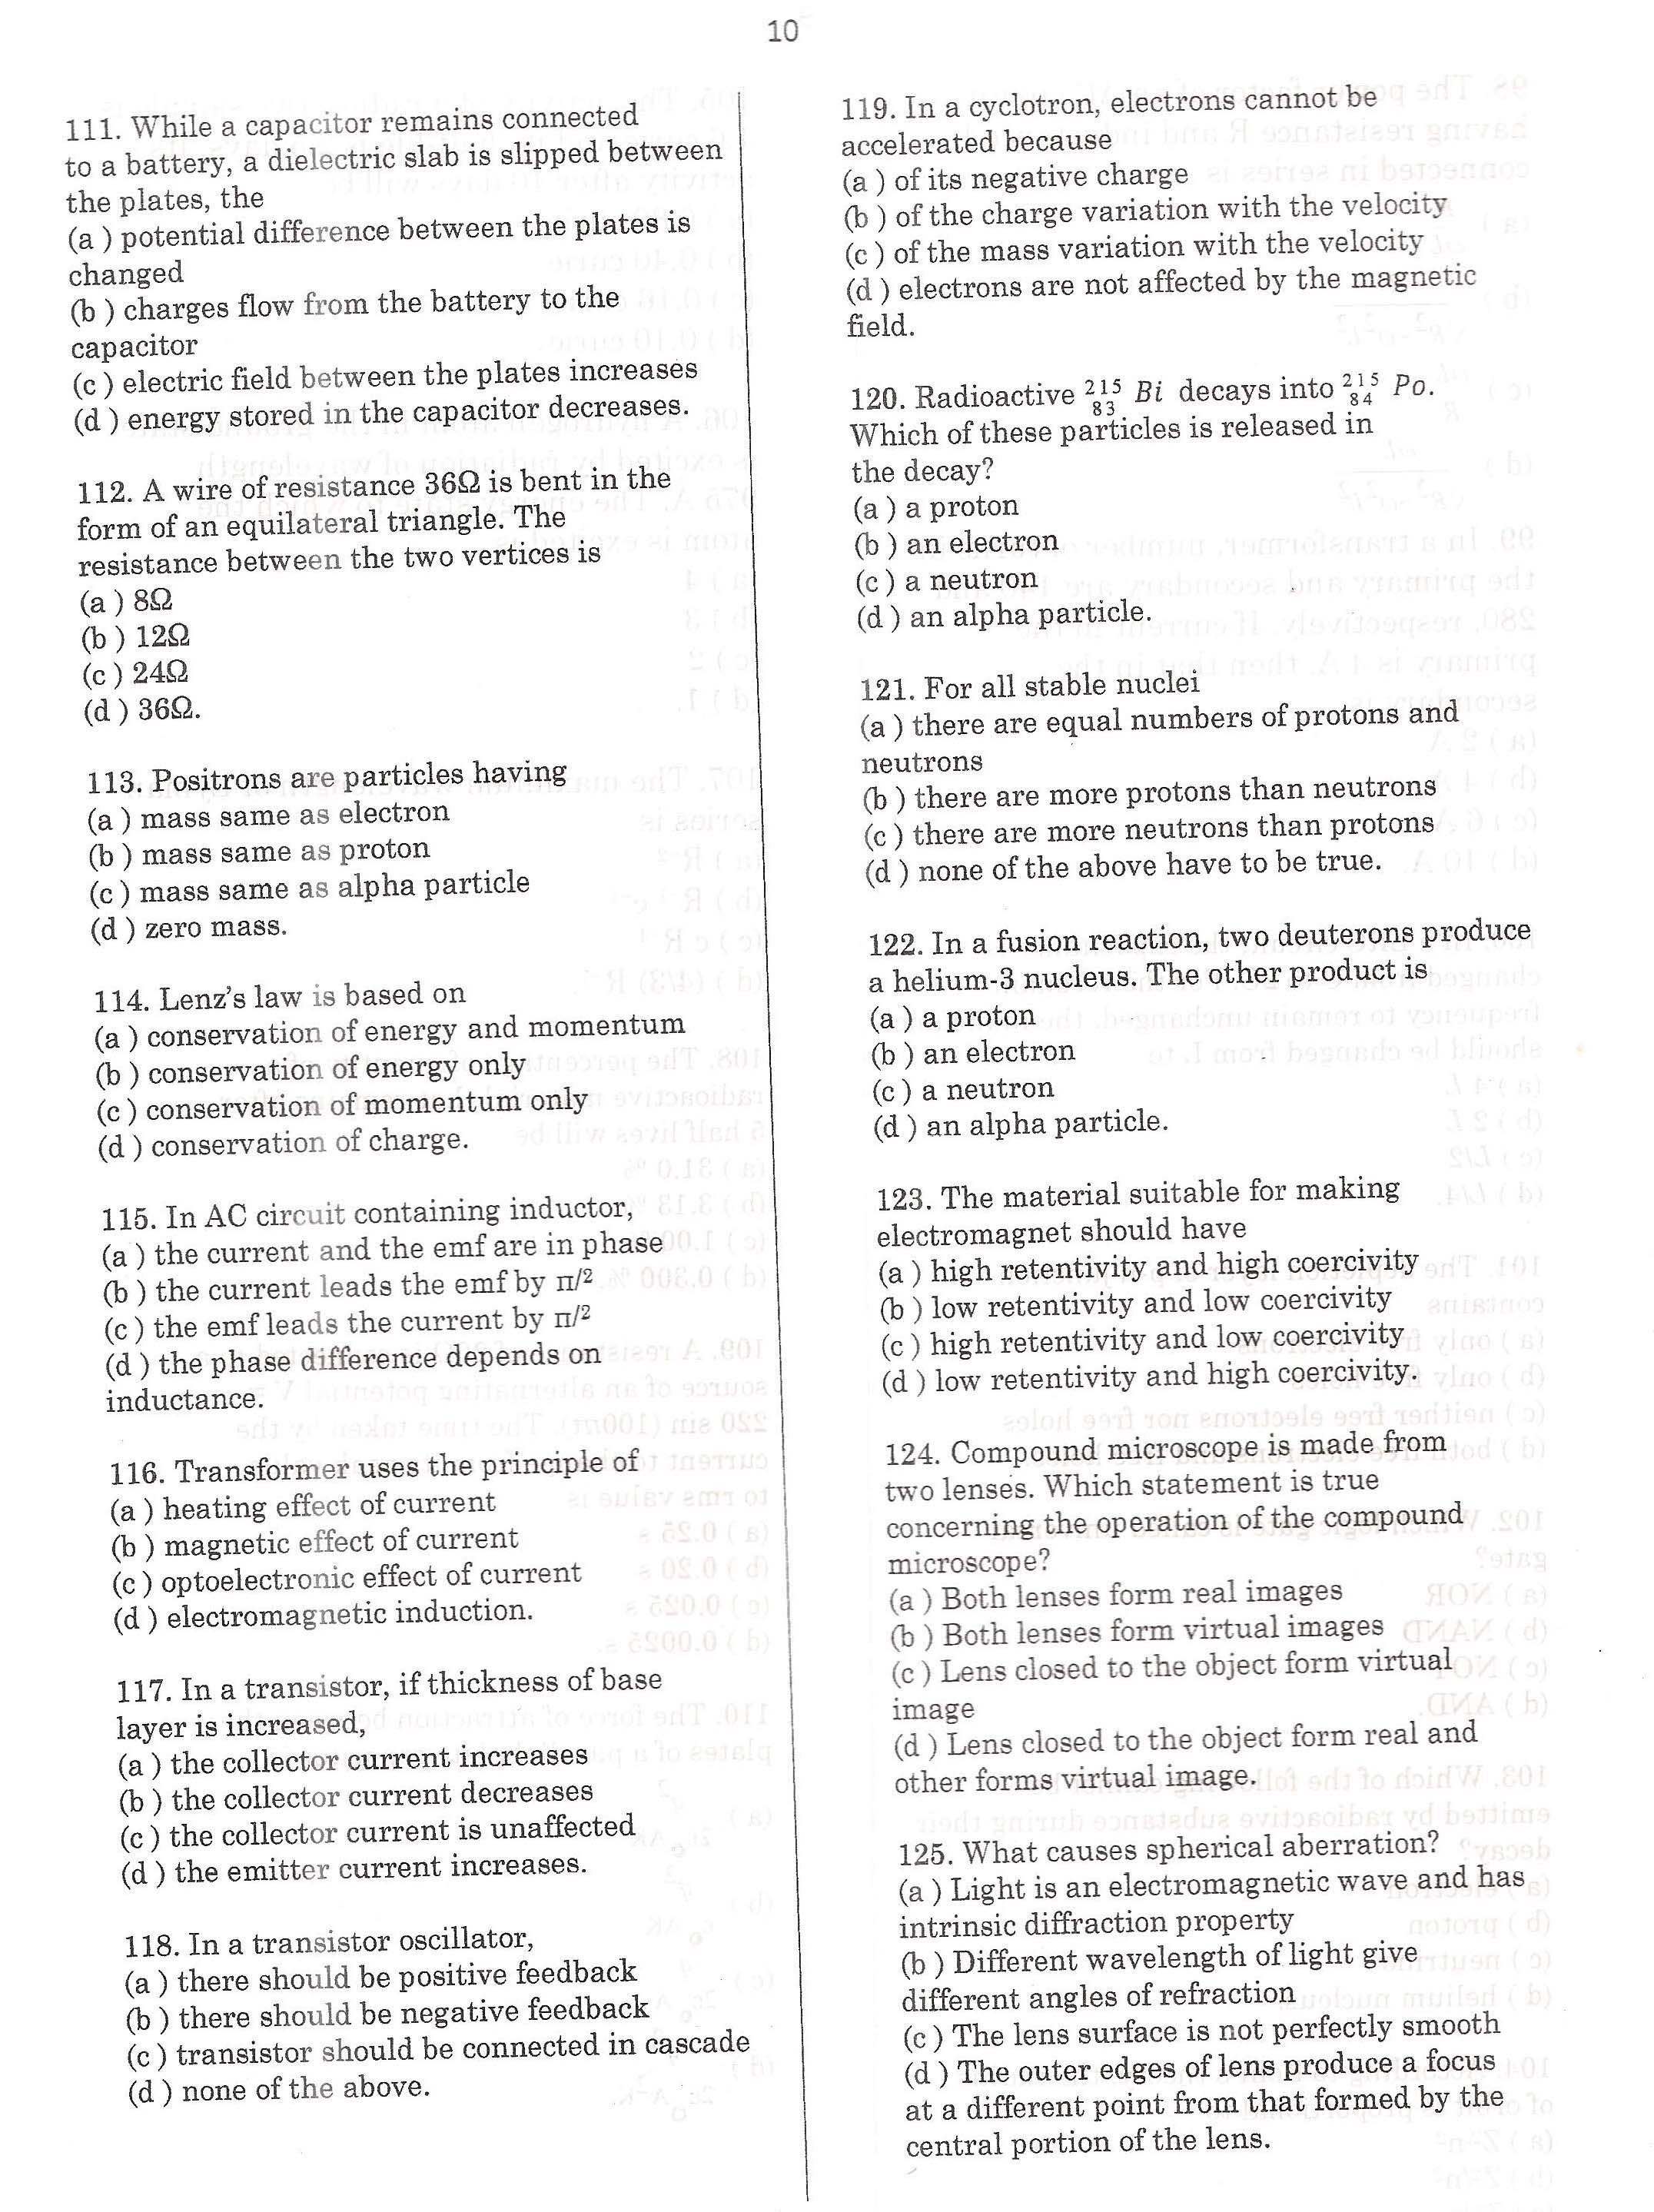 APPSC Combined Competitive Prelims Exam 2013 Physics 11